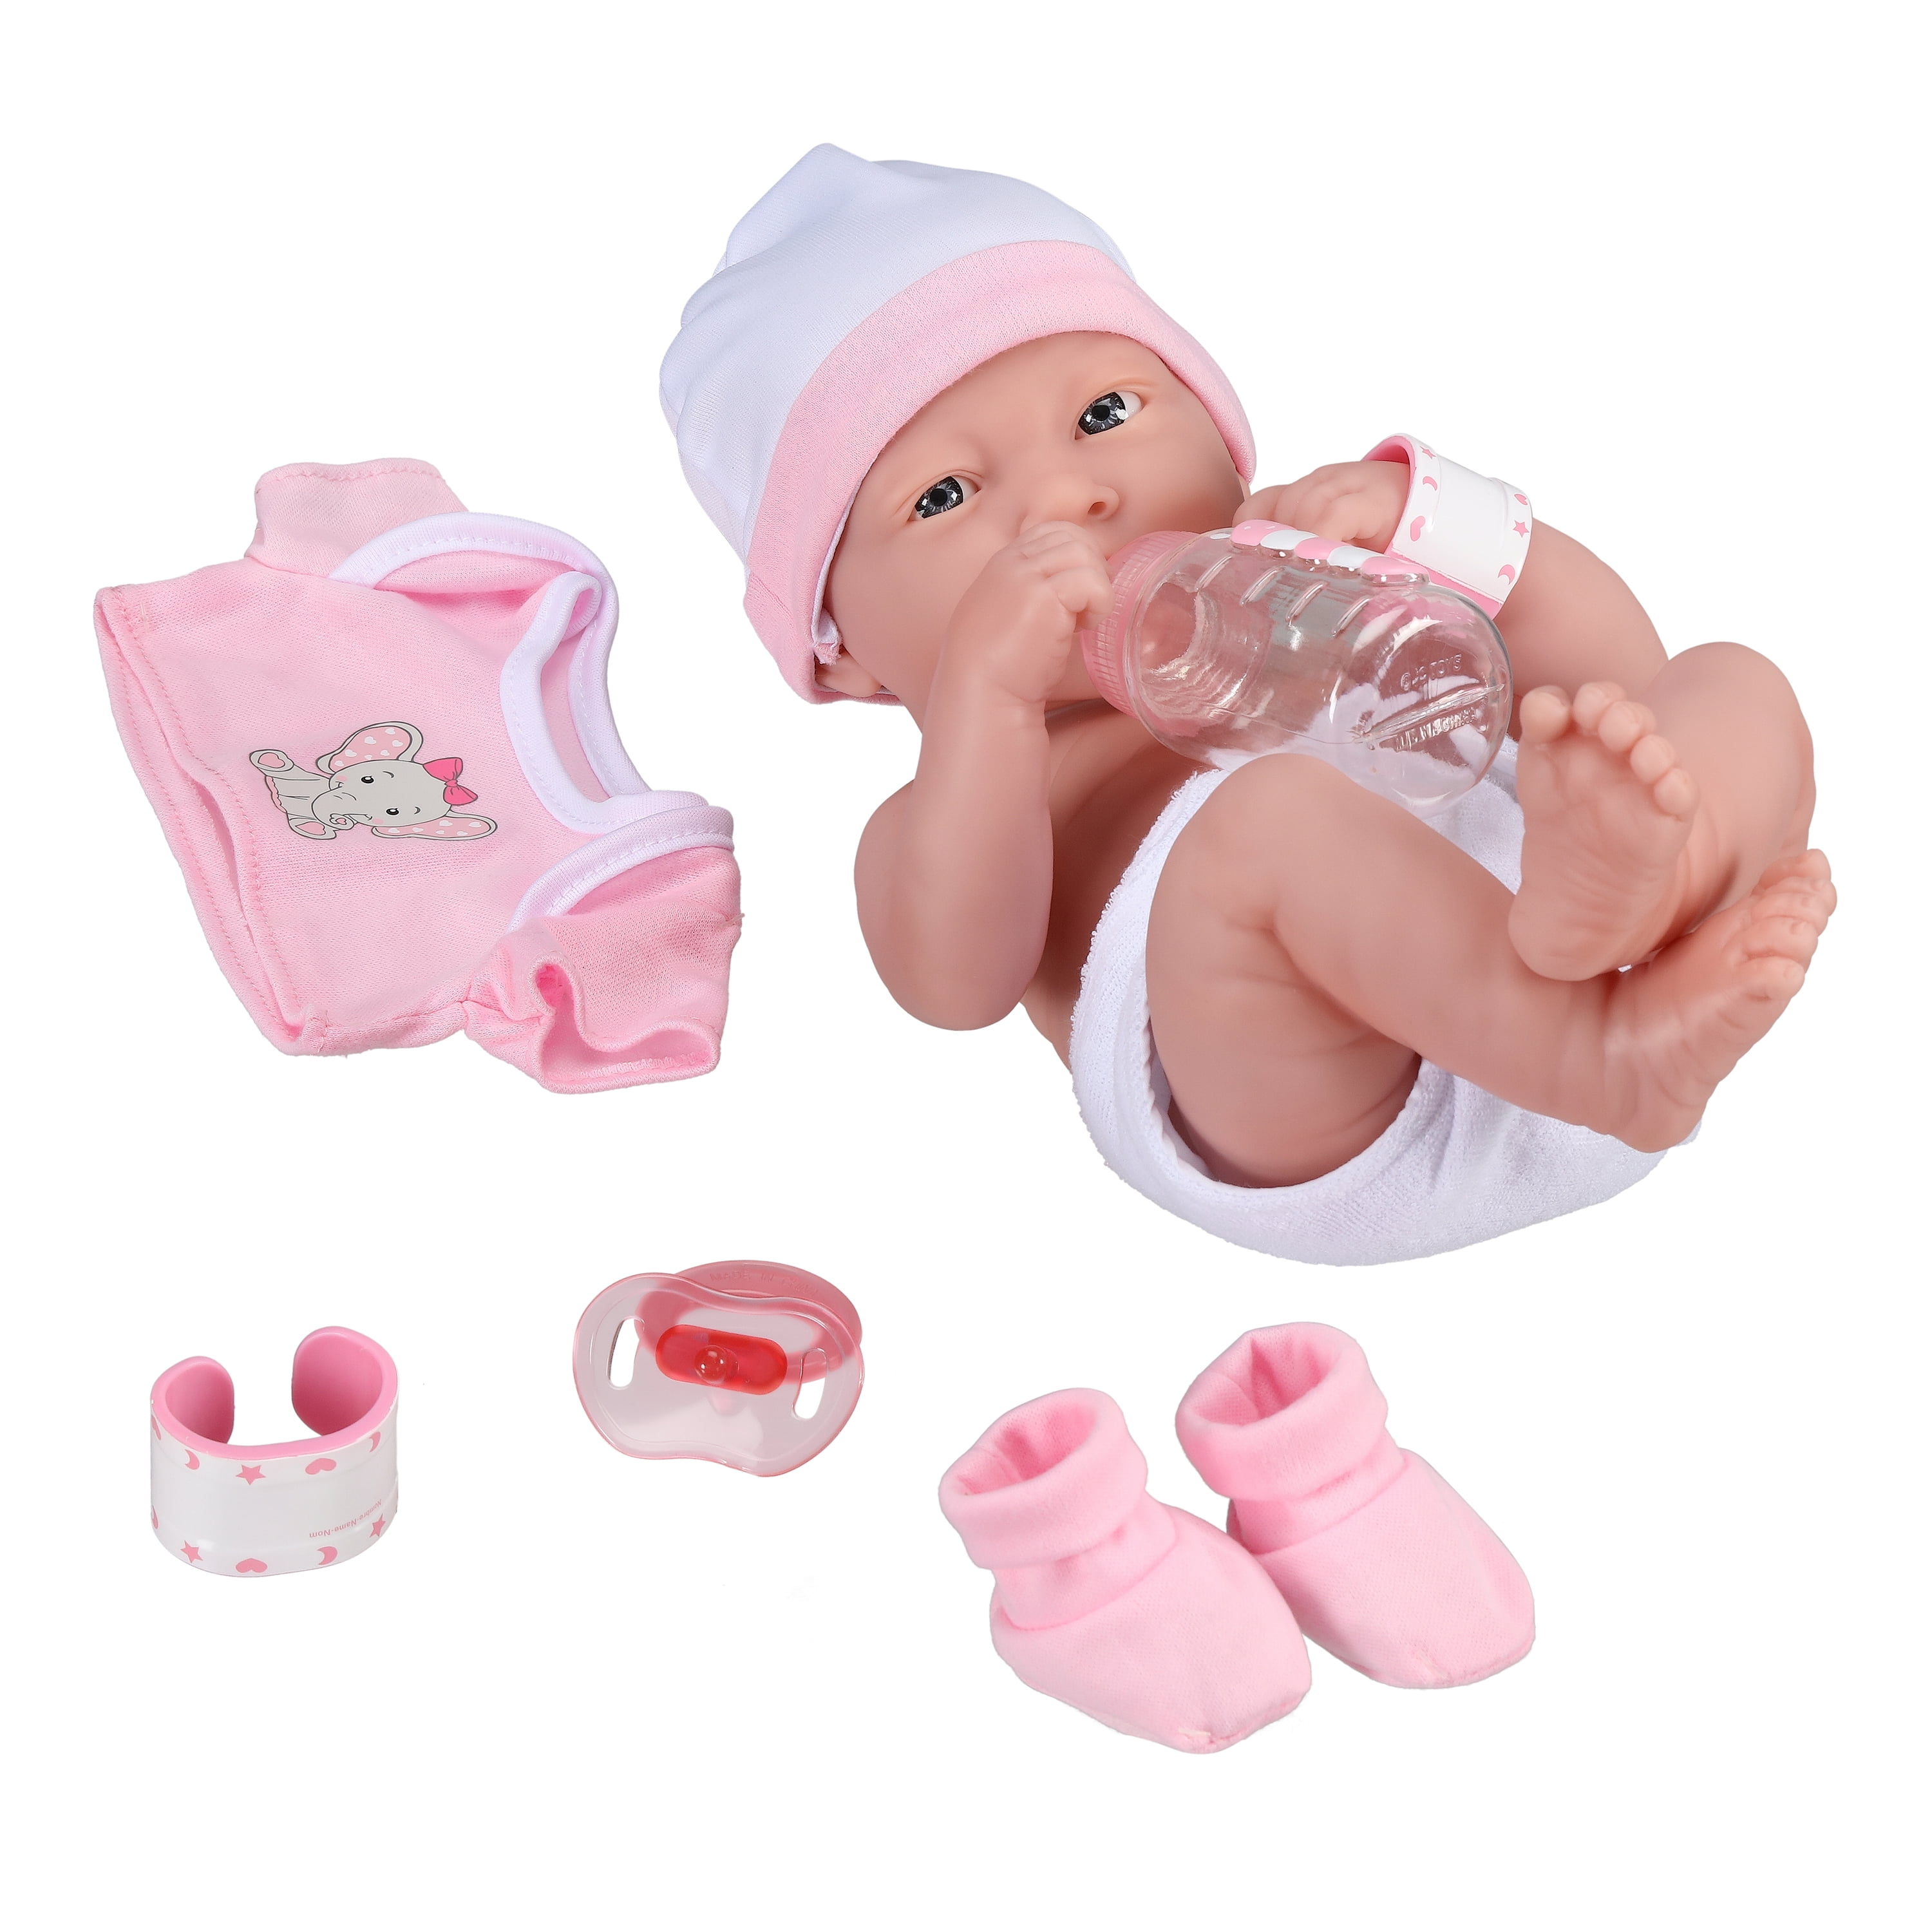 10 Piece Dolly Accessory And Nappy Set Doll's first Accessories kit 